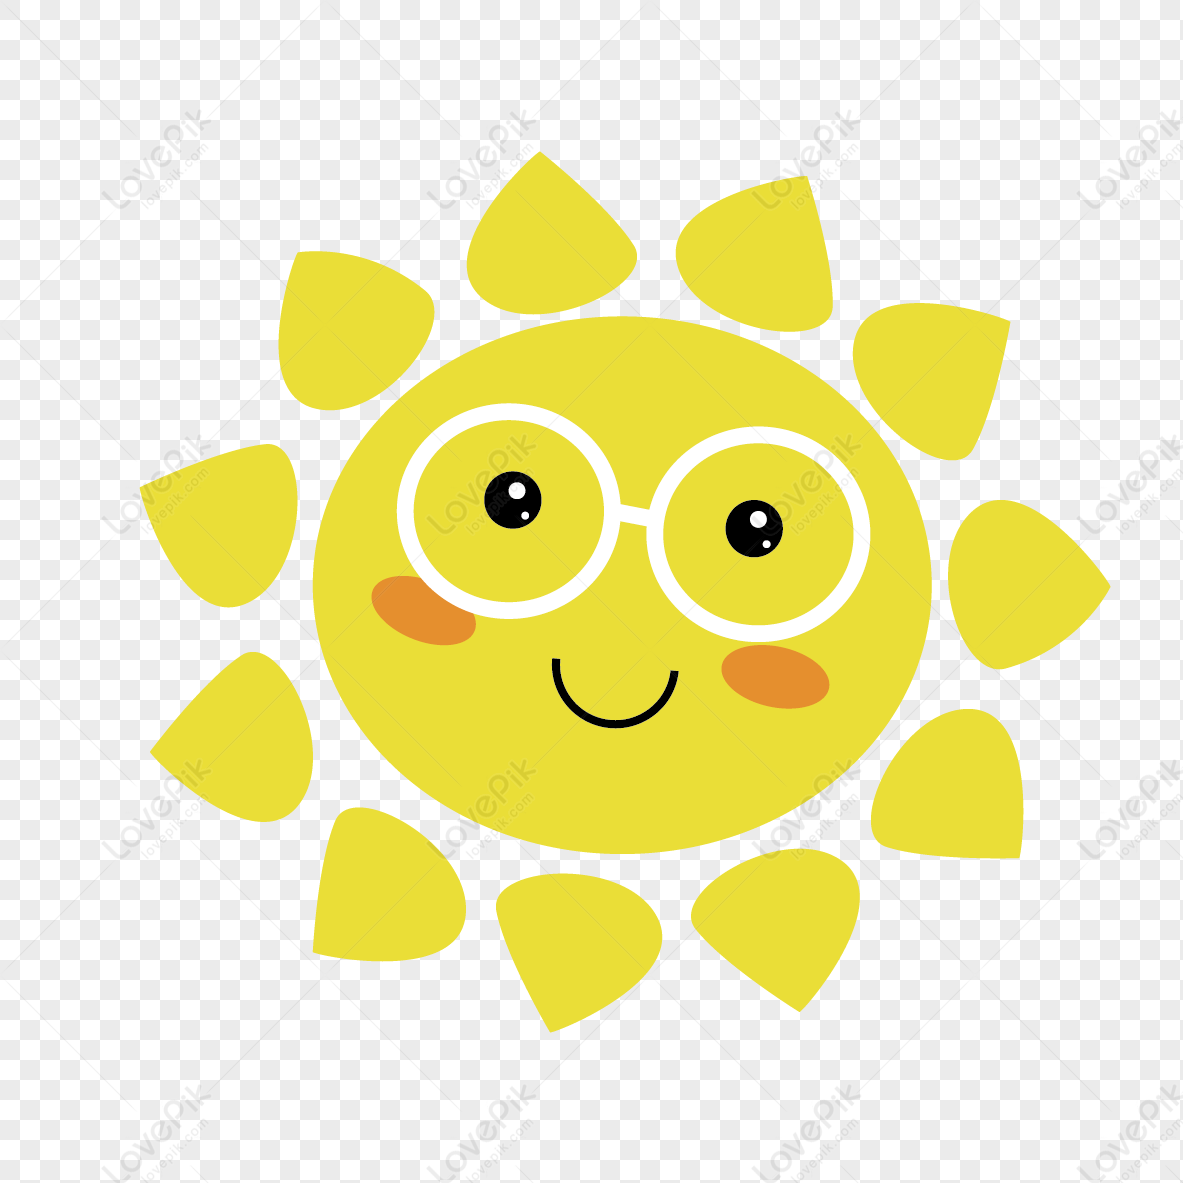 Sun Cartoon PNG Transparent And Clipart Image For Free Download - Lovepik |  401535626